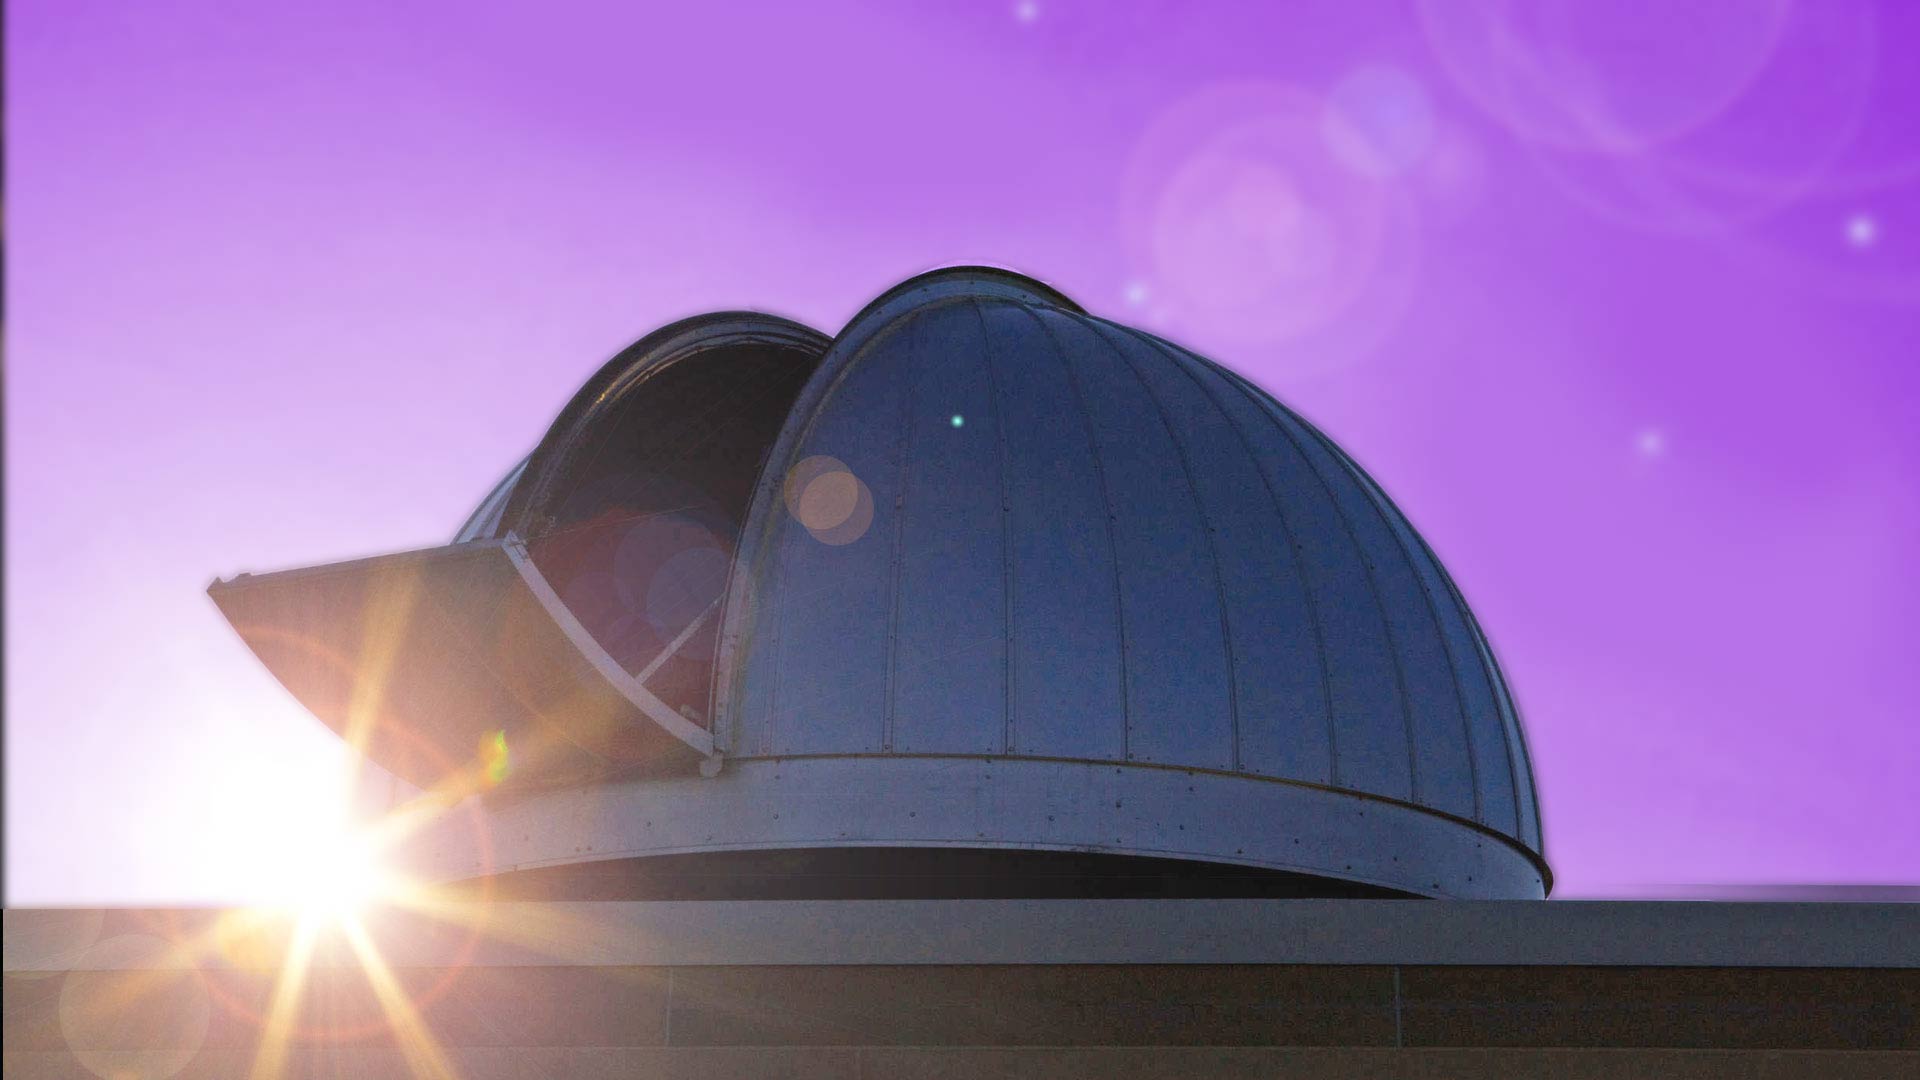 The observatory’s dome at sunset.